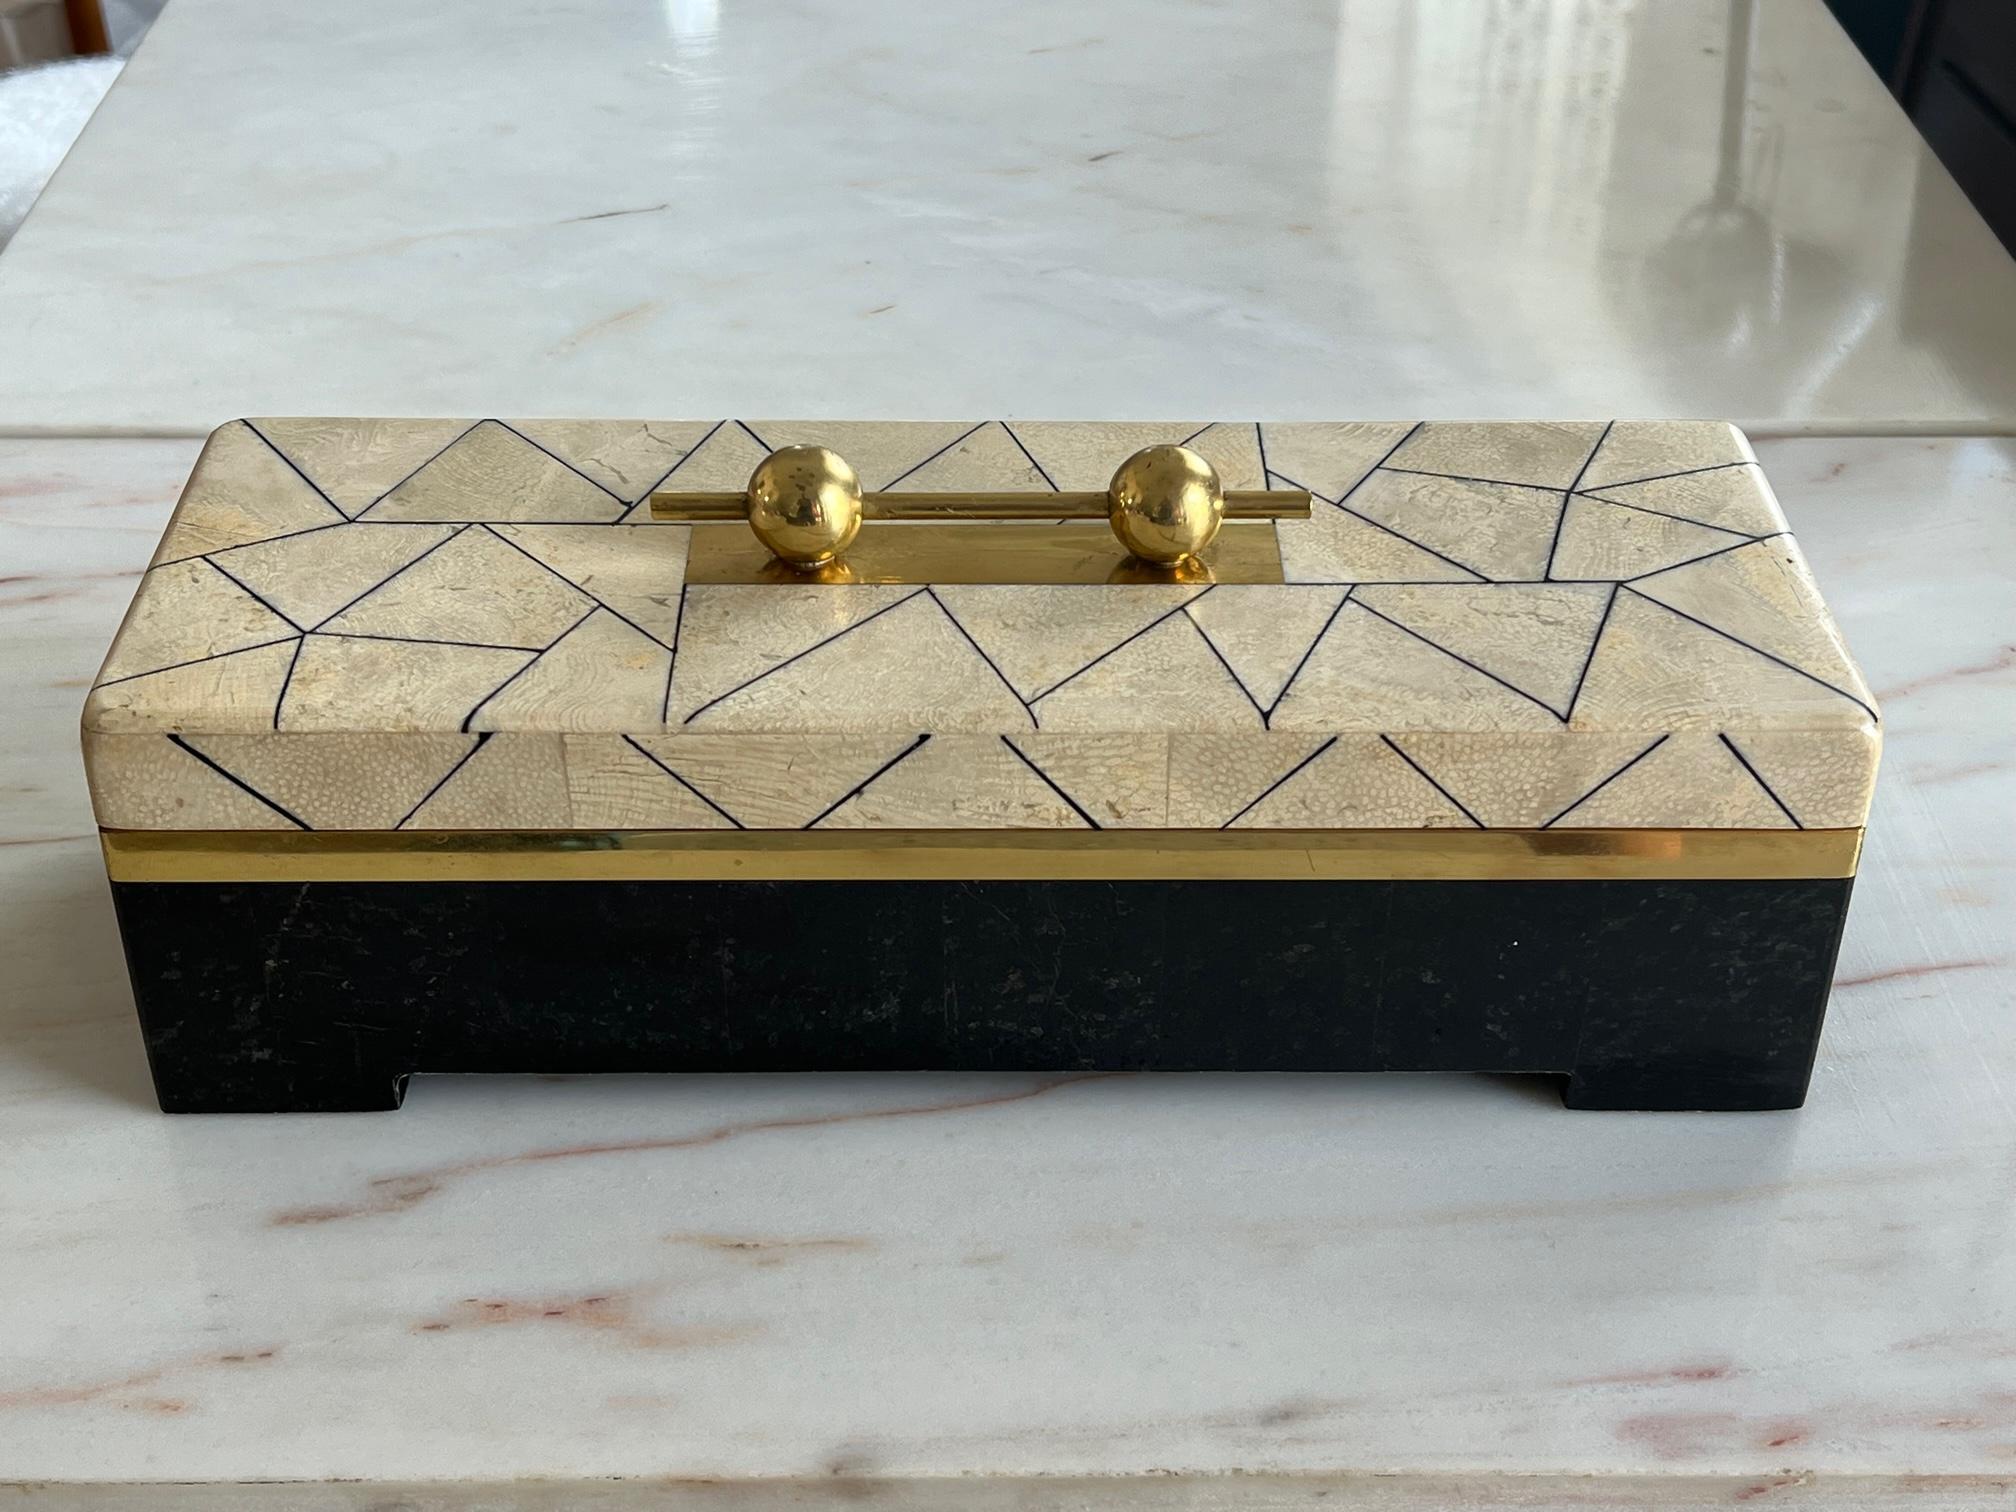 Unusual and elegant Maitland Smith stone and brass box. Quite large at 14